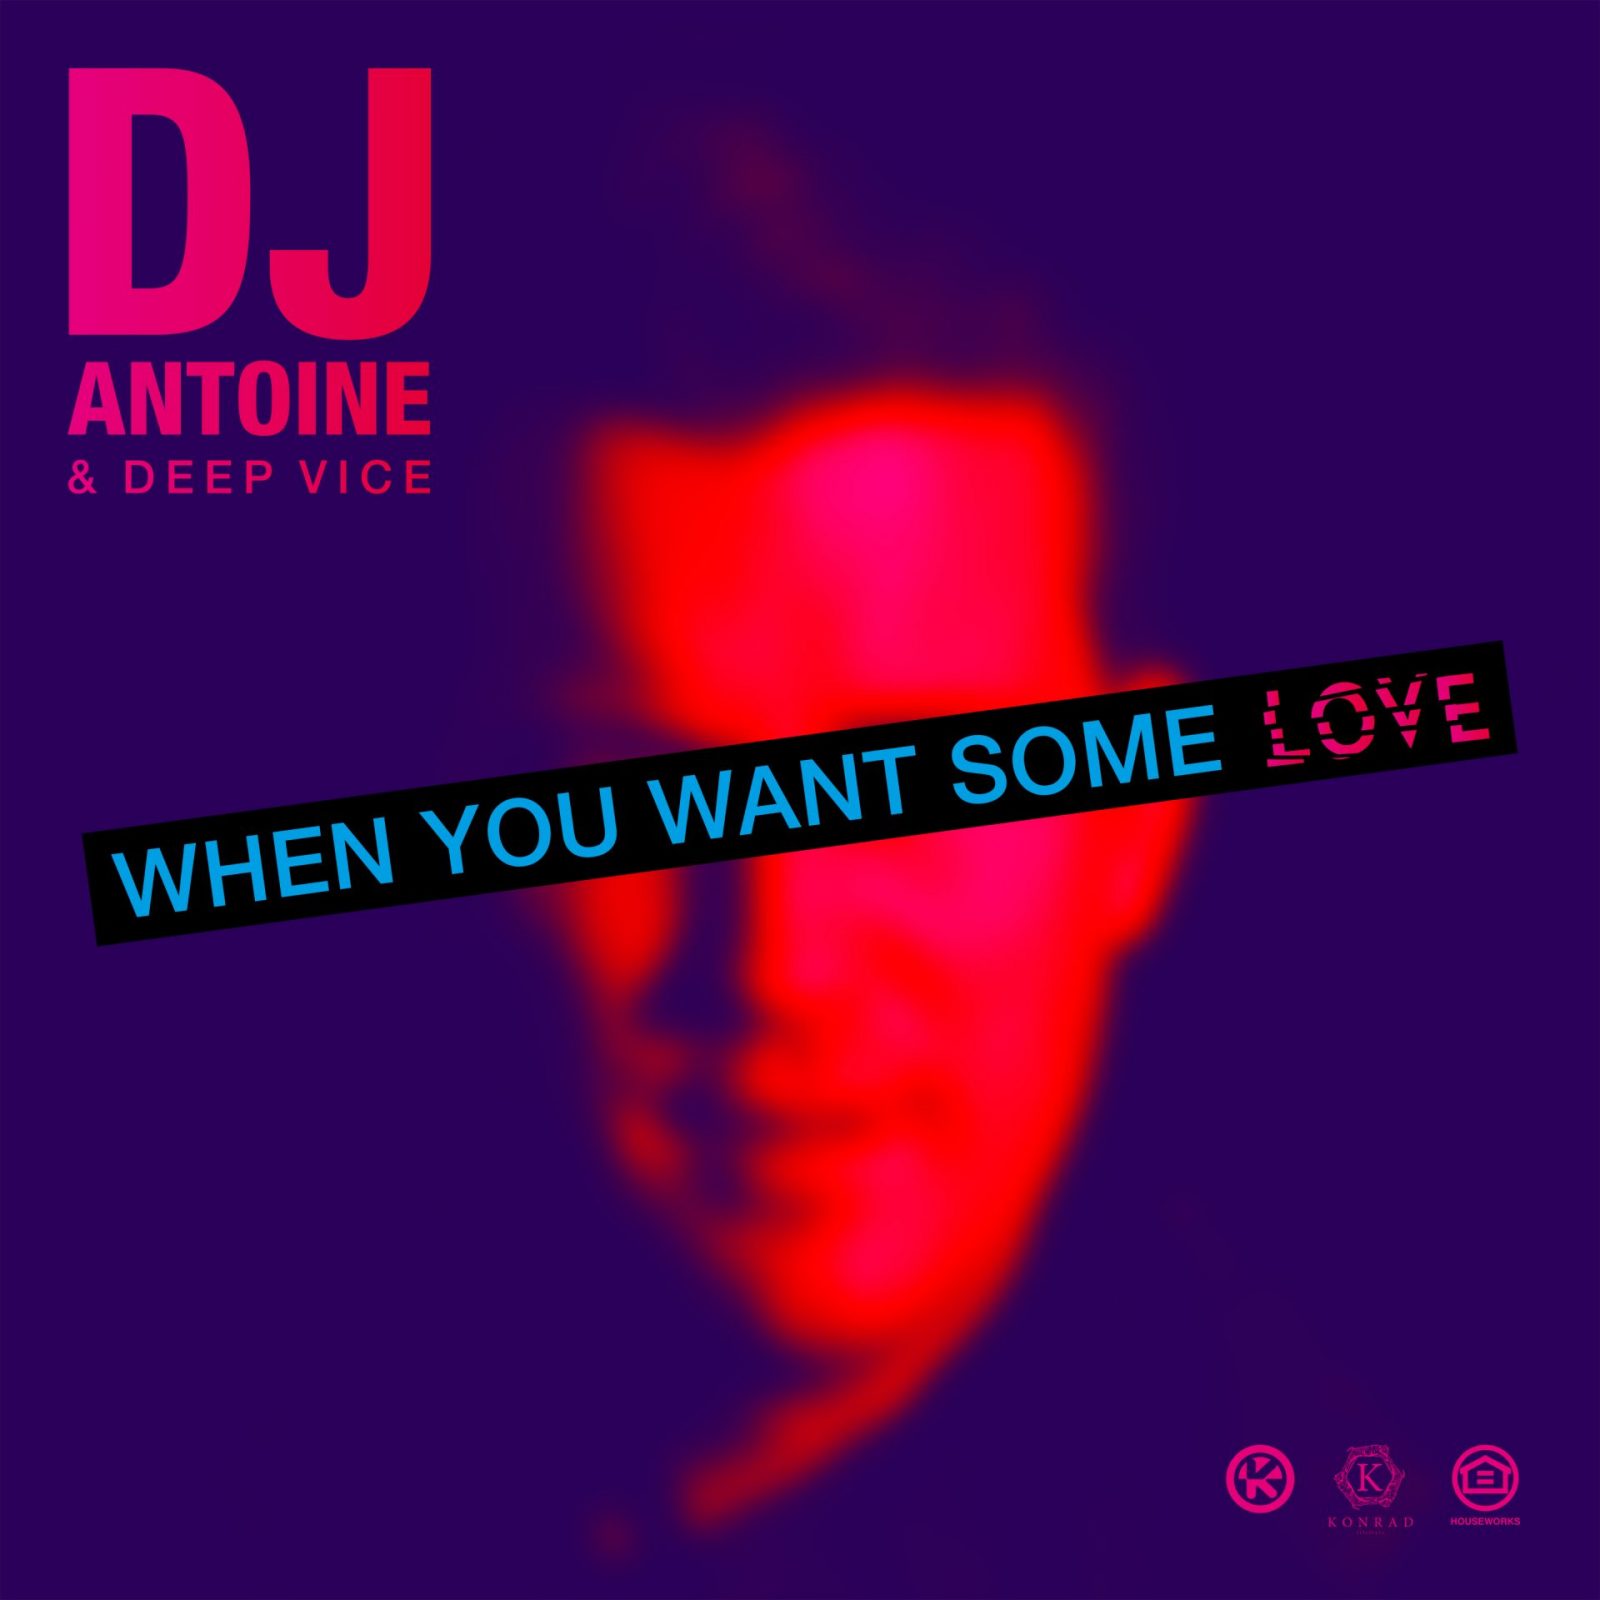 DJ ANTOINE & DEEP VICE - WHEN YOU WANT SOME LOVE